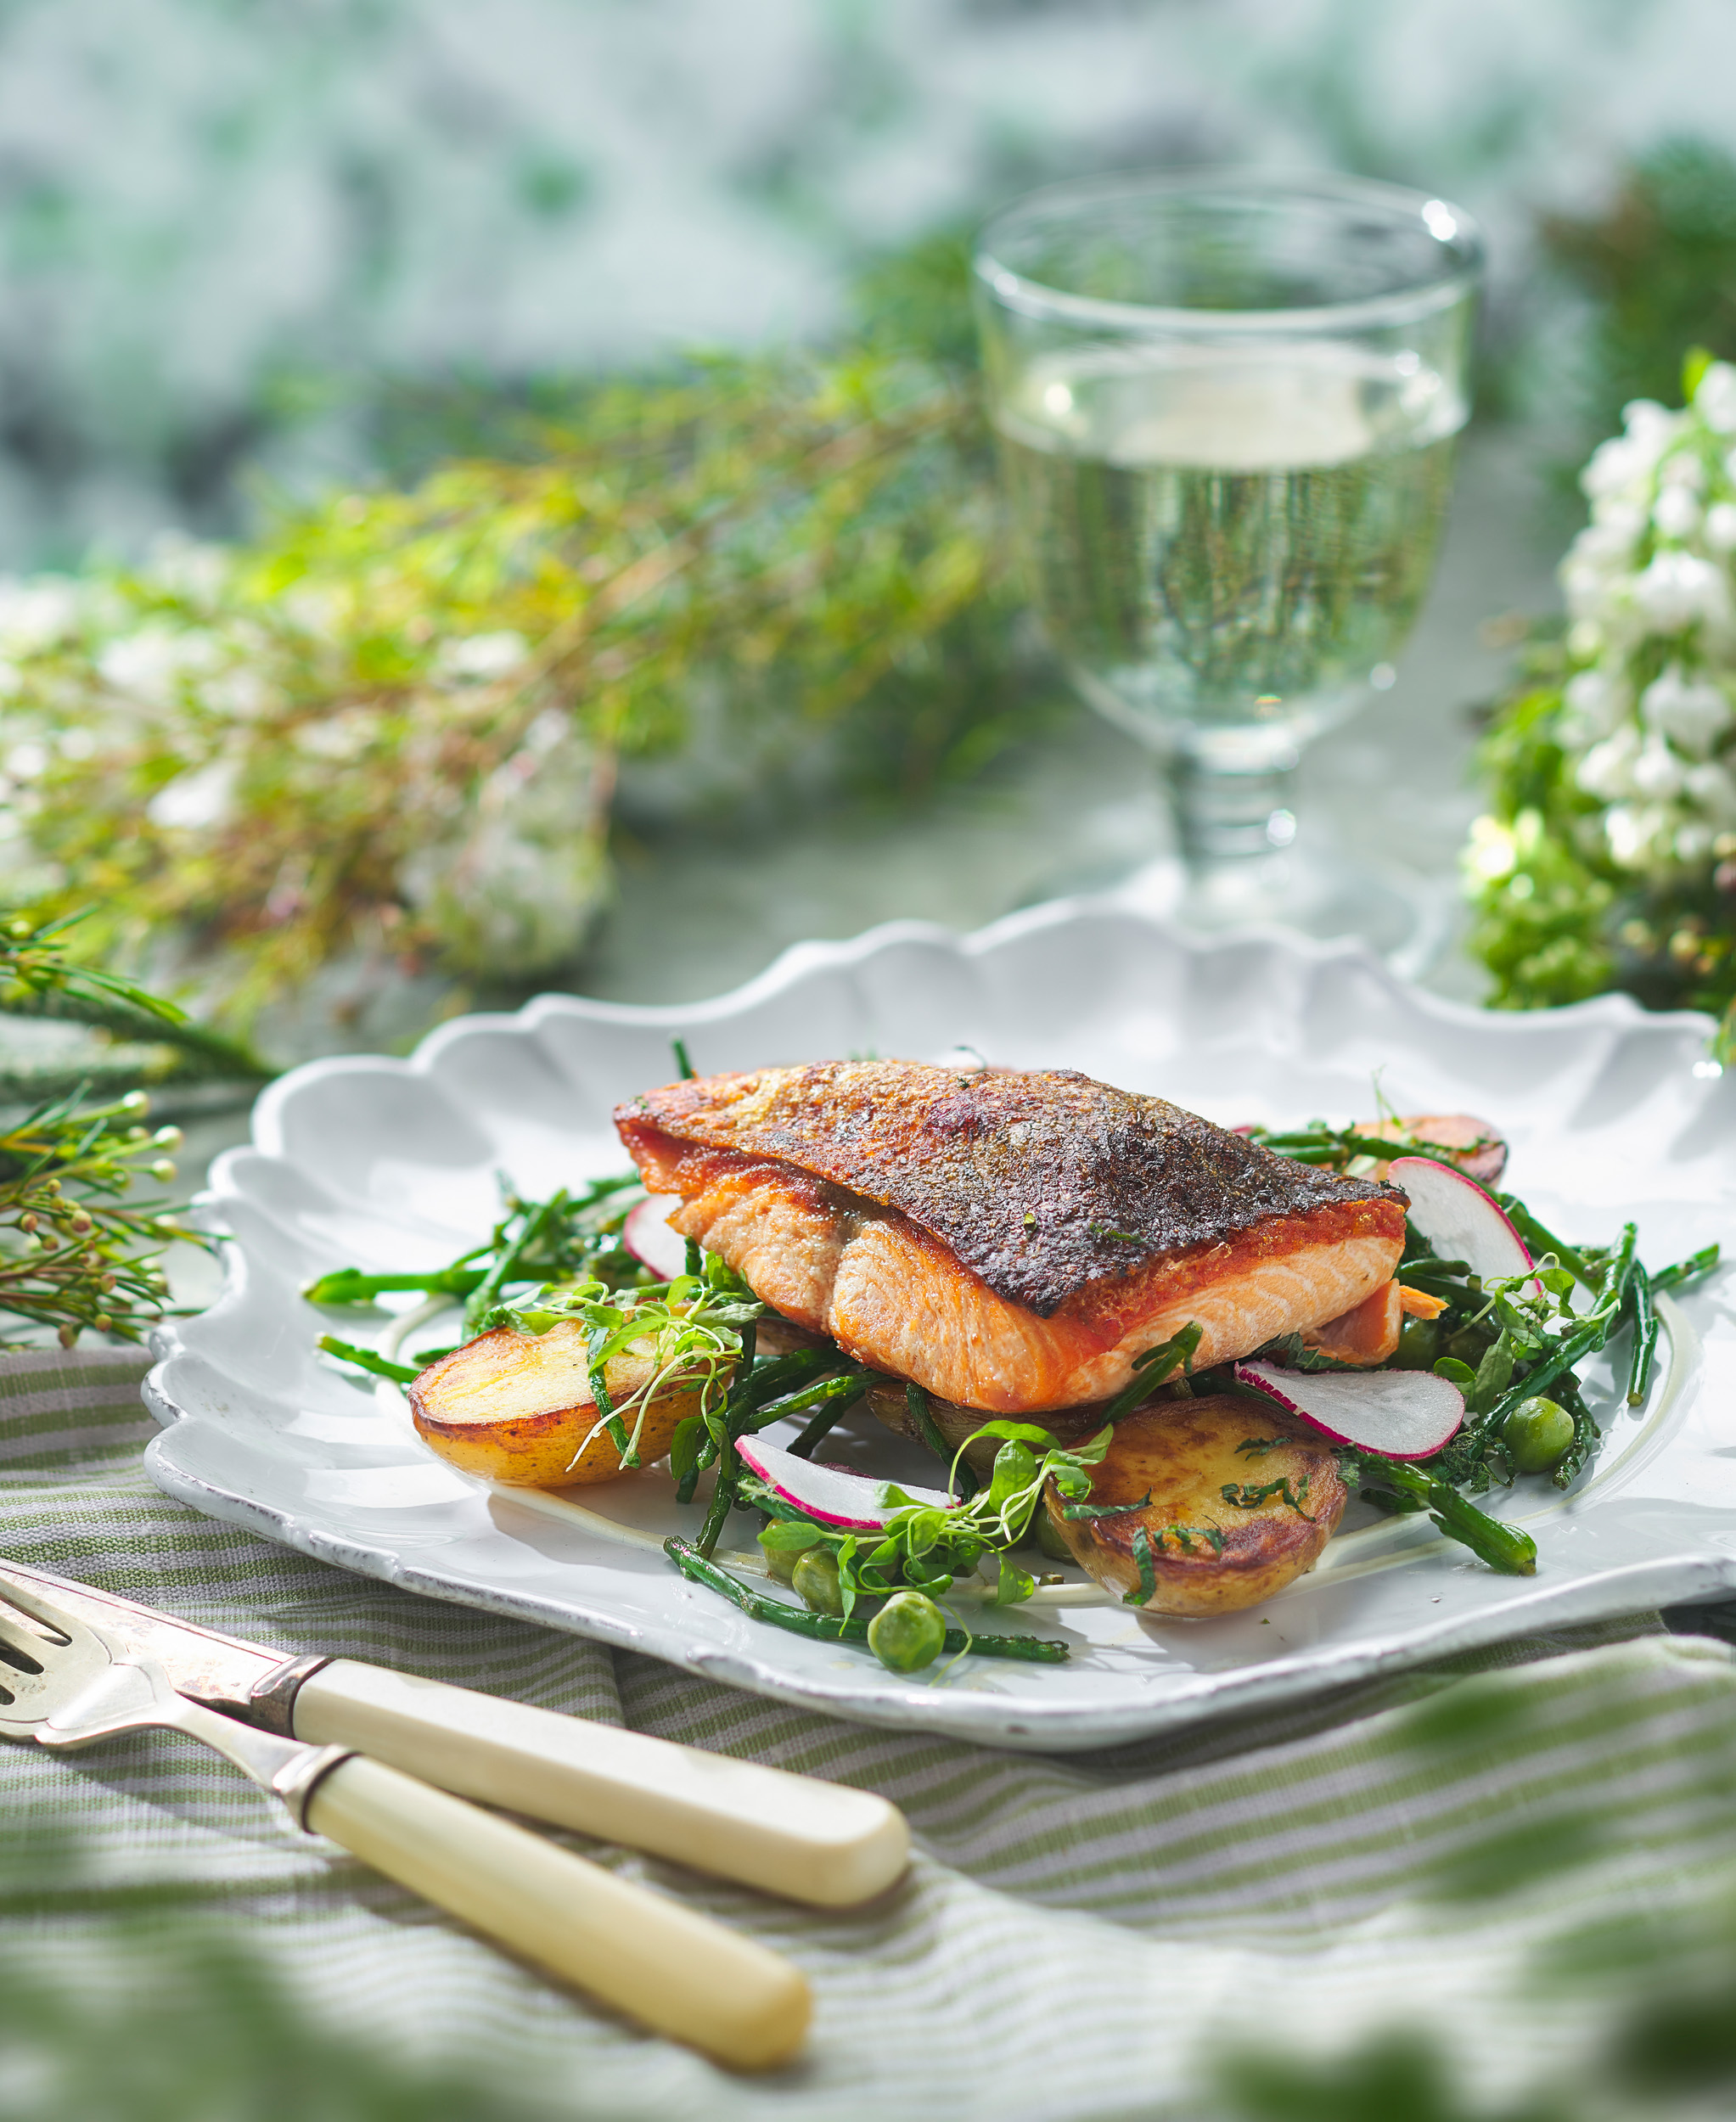 https://www.drakeandmorgan.co.uk/the-refinery-citypoint/wp-content/uploads/sites/66/2022/06/Seafood-Trout-3.jpg